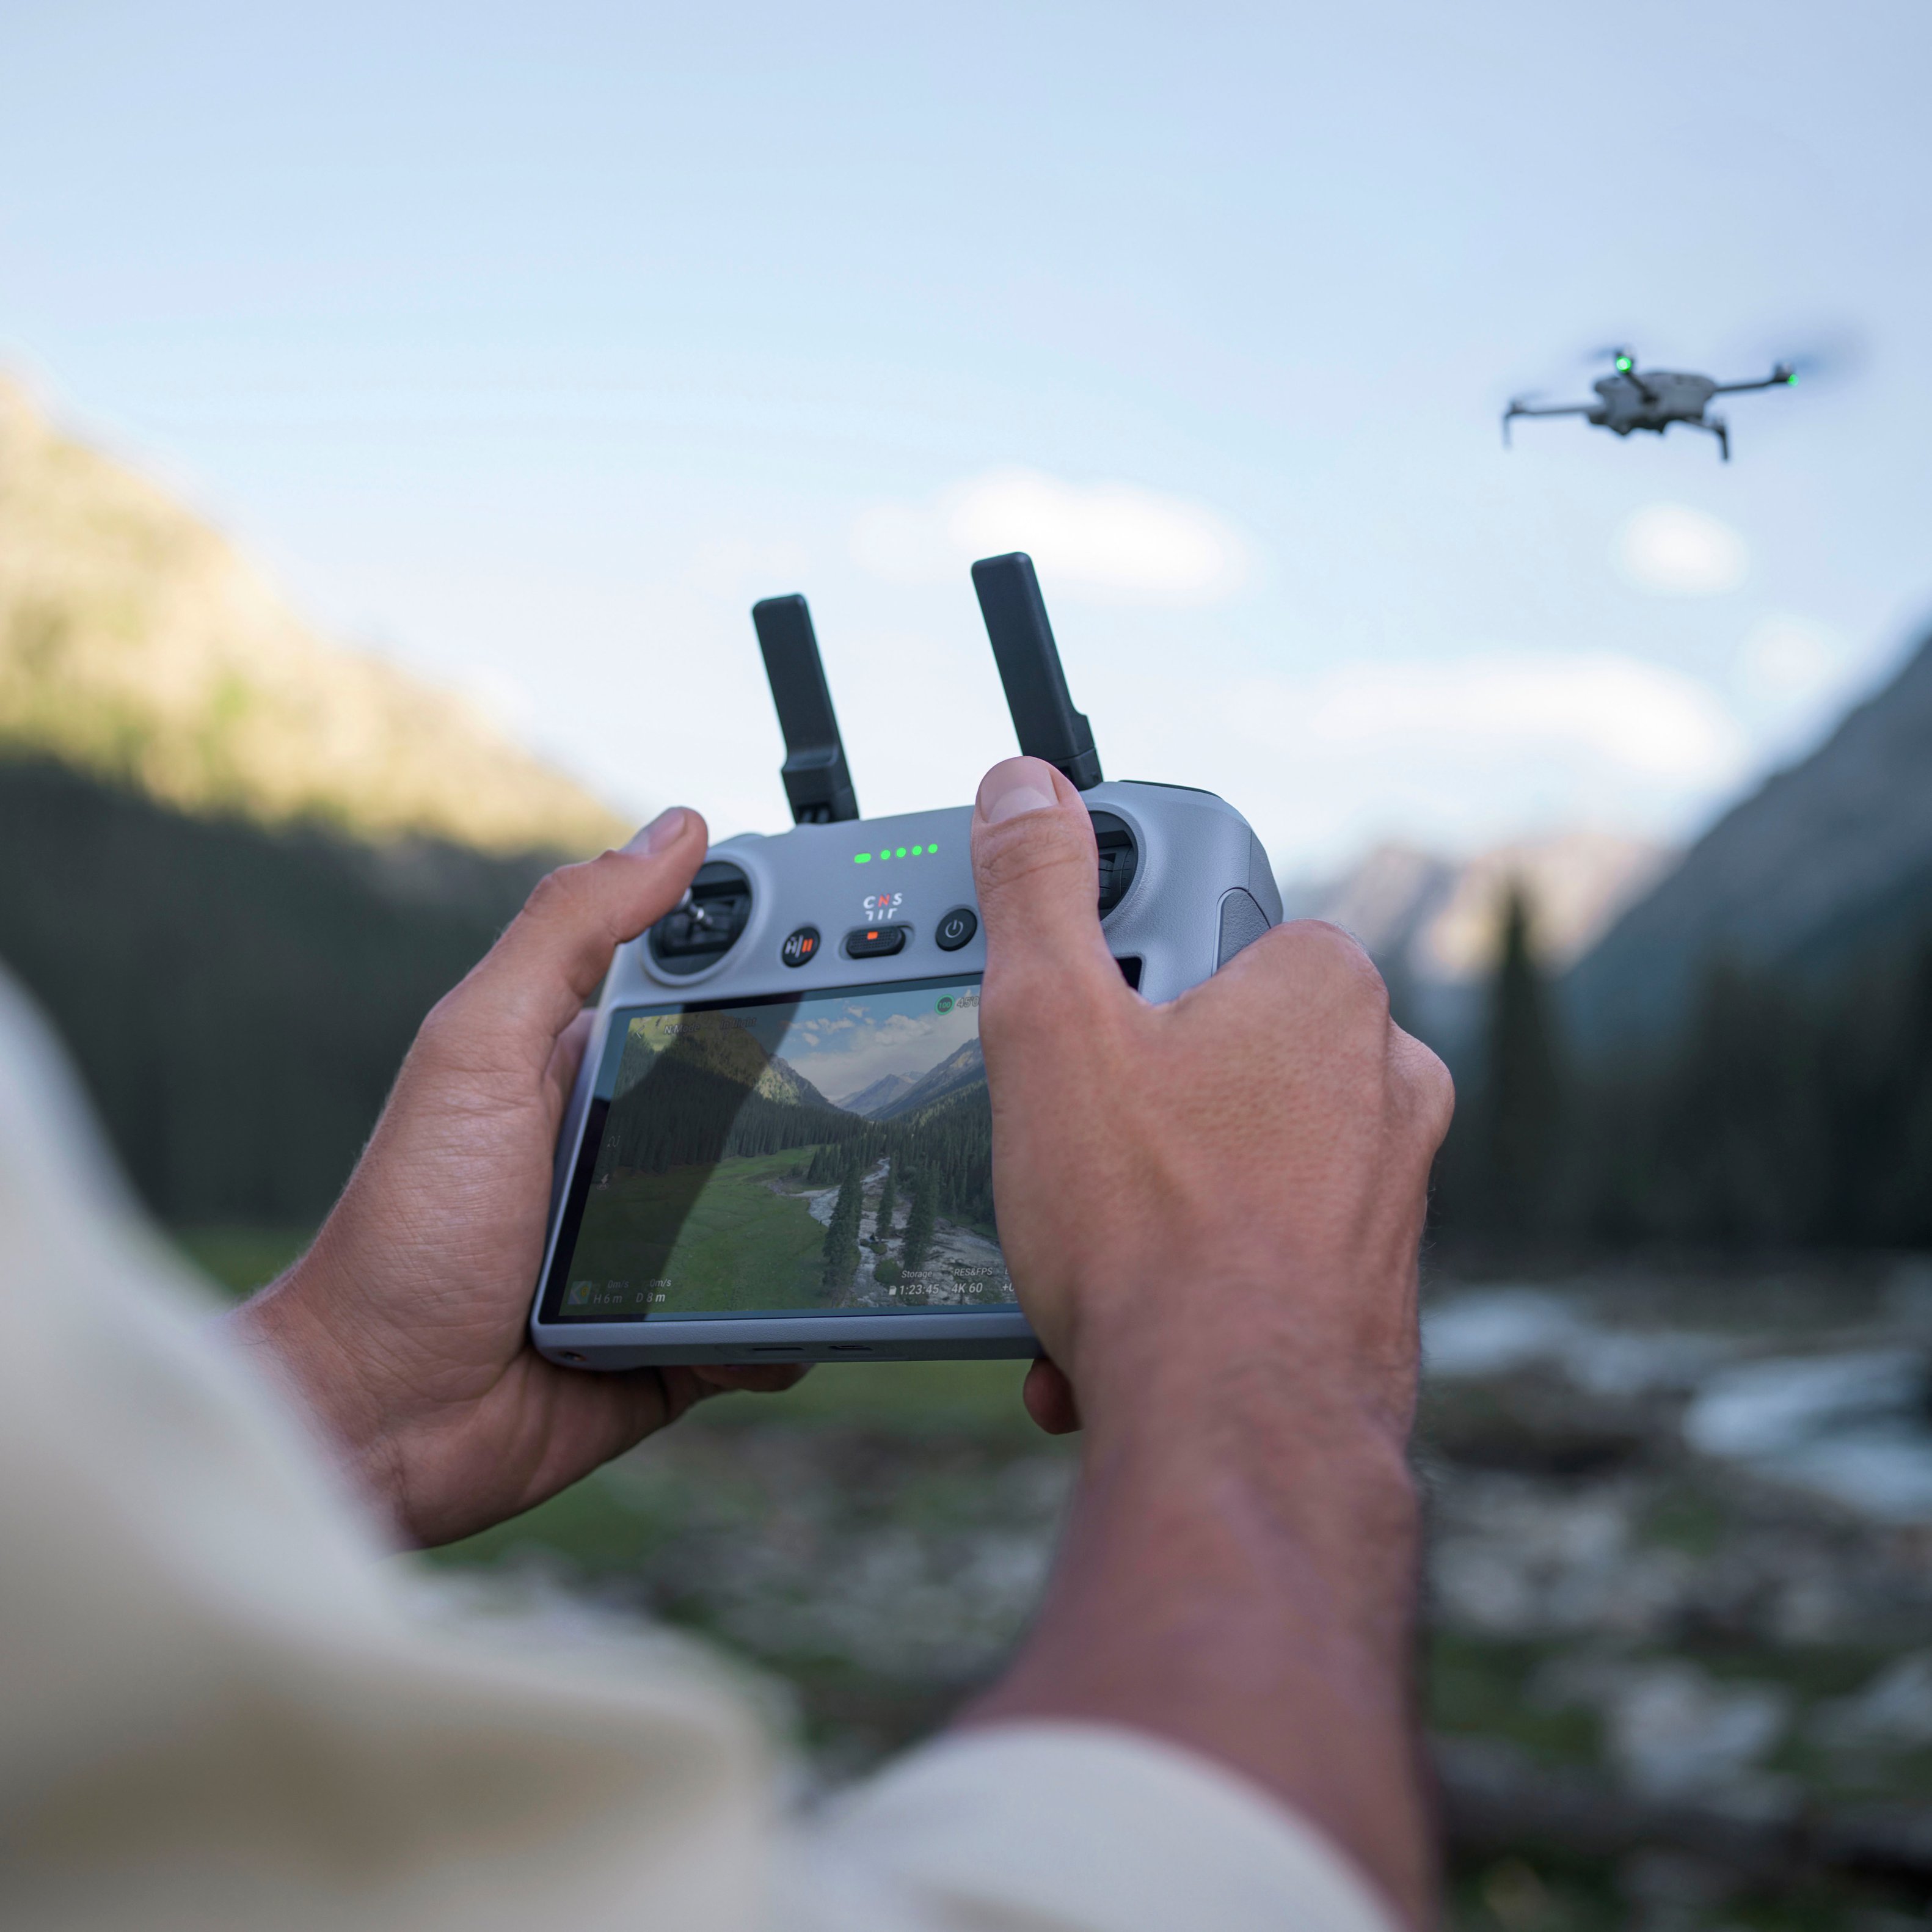 DJI Mini 4 Pro cleared for take-off as Skydio sunsets its rival drones